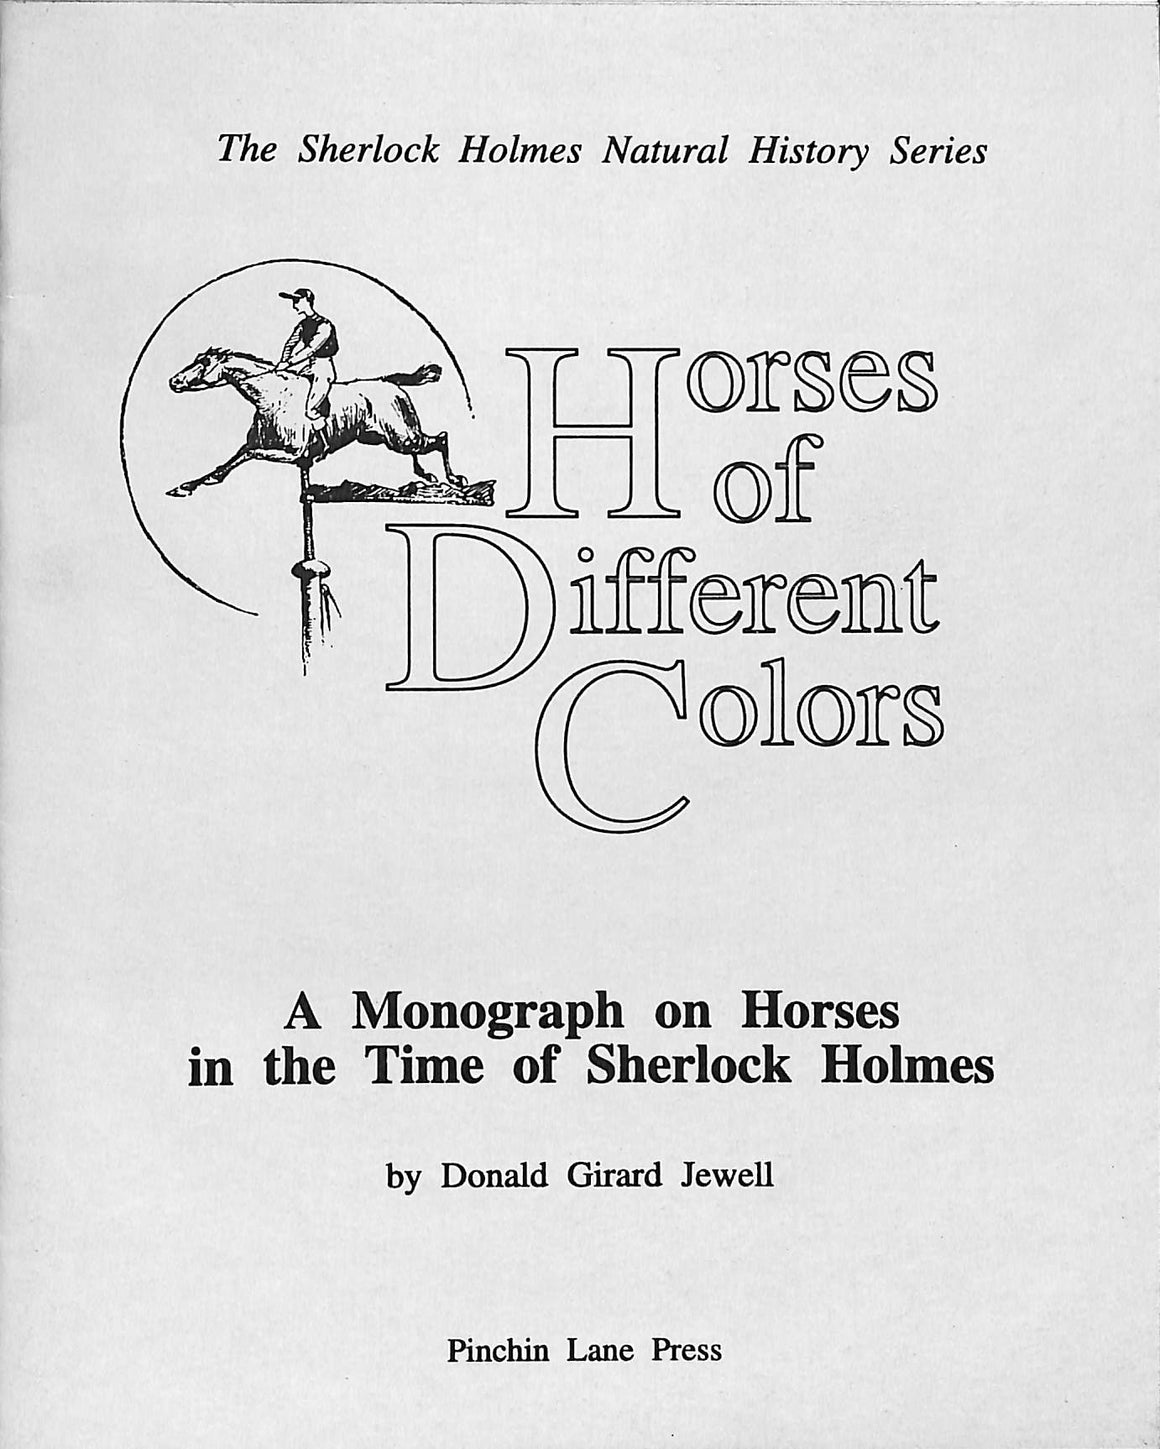 "Horses Of Different Colors A Monograph On Horses In The Time Of Sherlock Holmes" 1995 JEWELL, Donald Girard